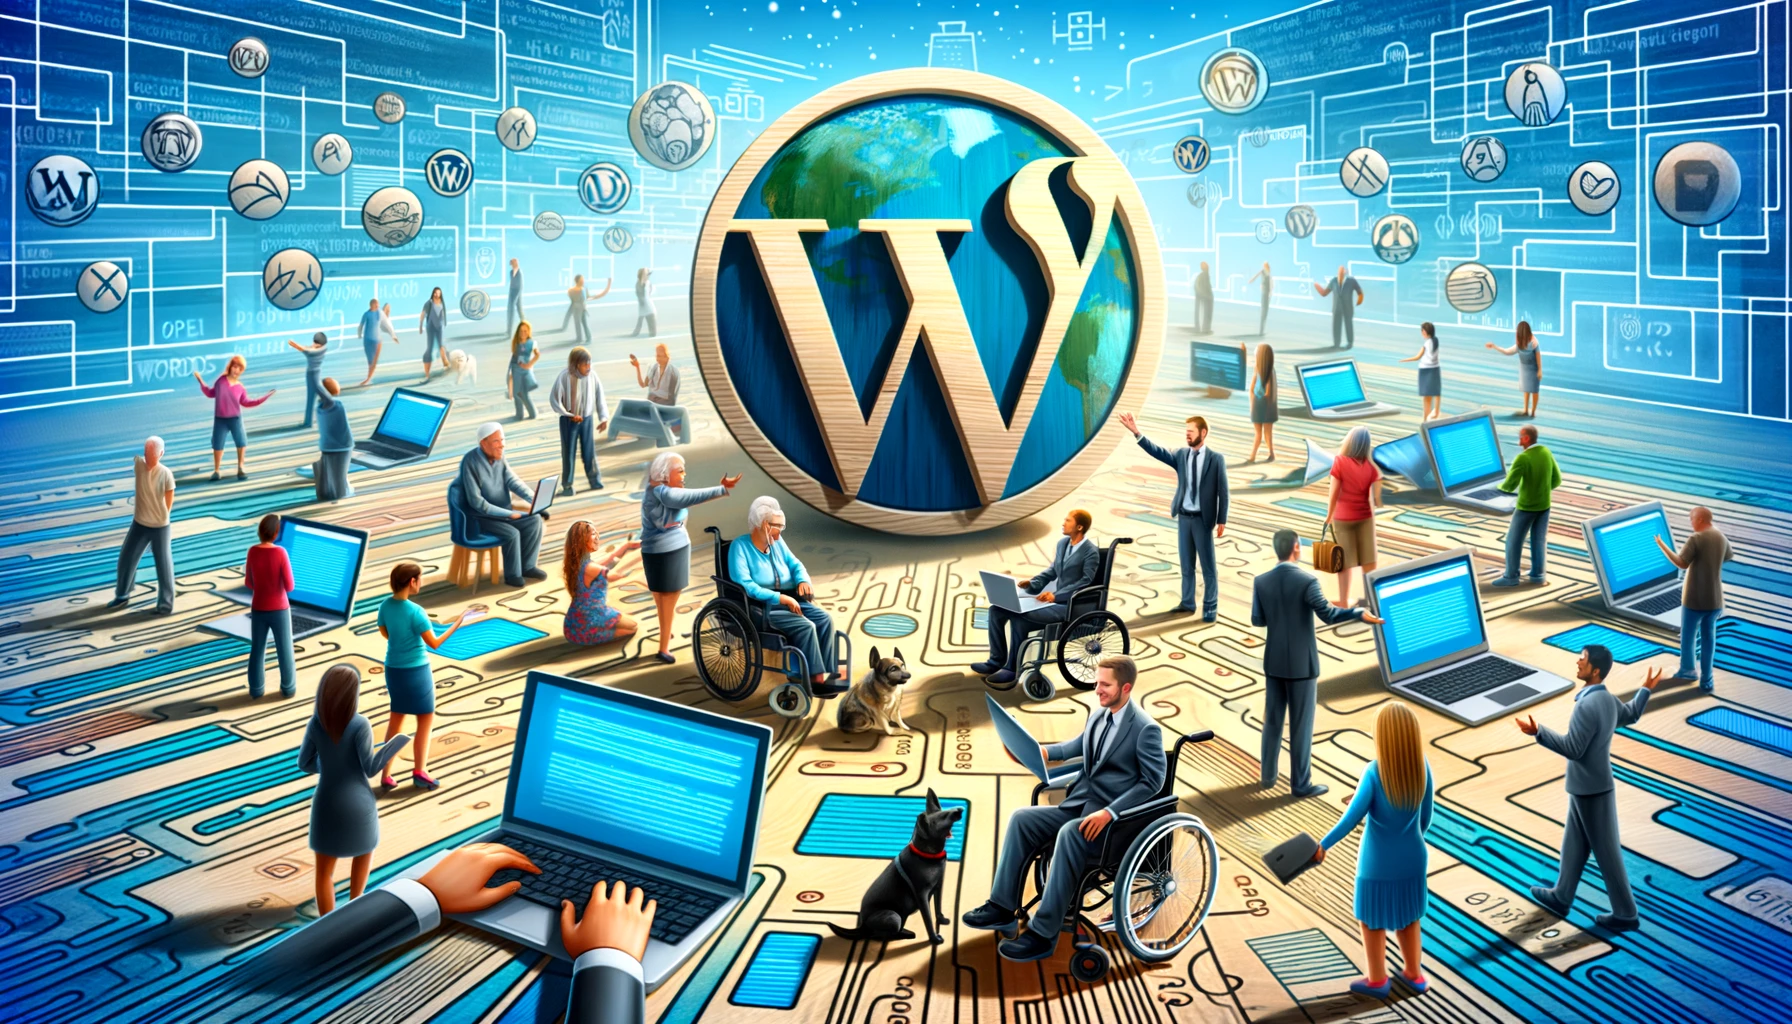 The WordPress Logo, a large W, is in the middle of a 3D graphic world of computers and people using various assitive devices like wheelchairs. The image was generated to embody the themes of web accessibility and WordPress integration, as discussed in the blog post.